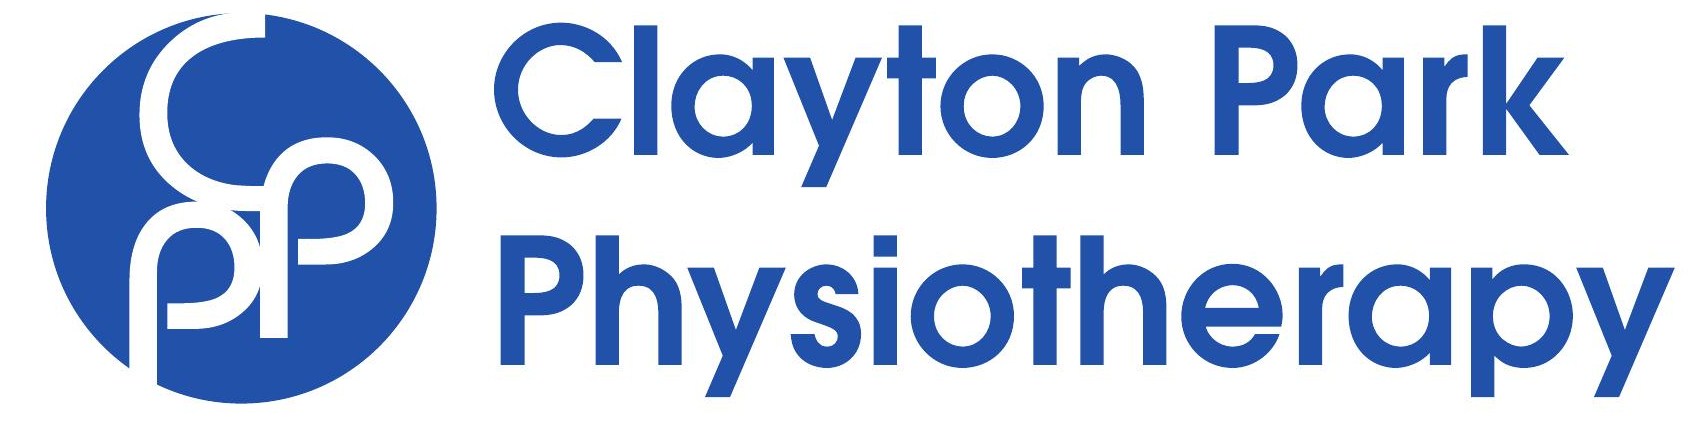 Clayton Park Physiotherapy